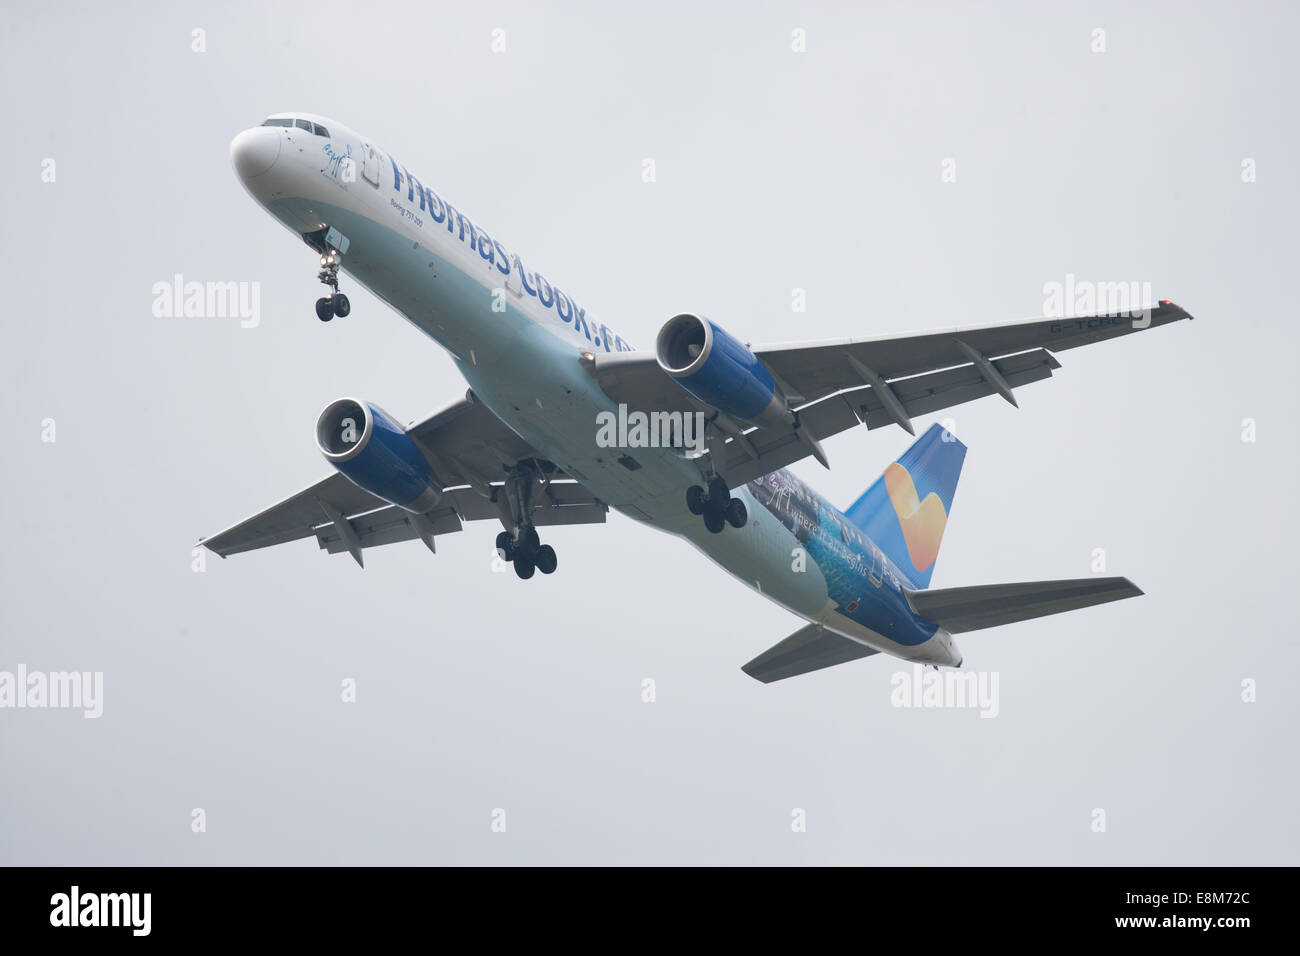 Thomas Cook Boeing 757-200 on approach to land Stock Photo